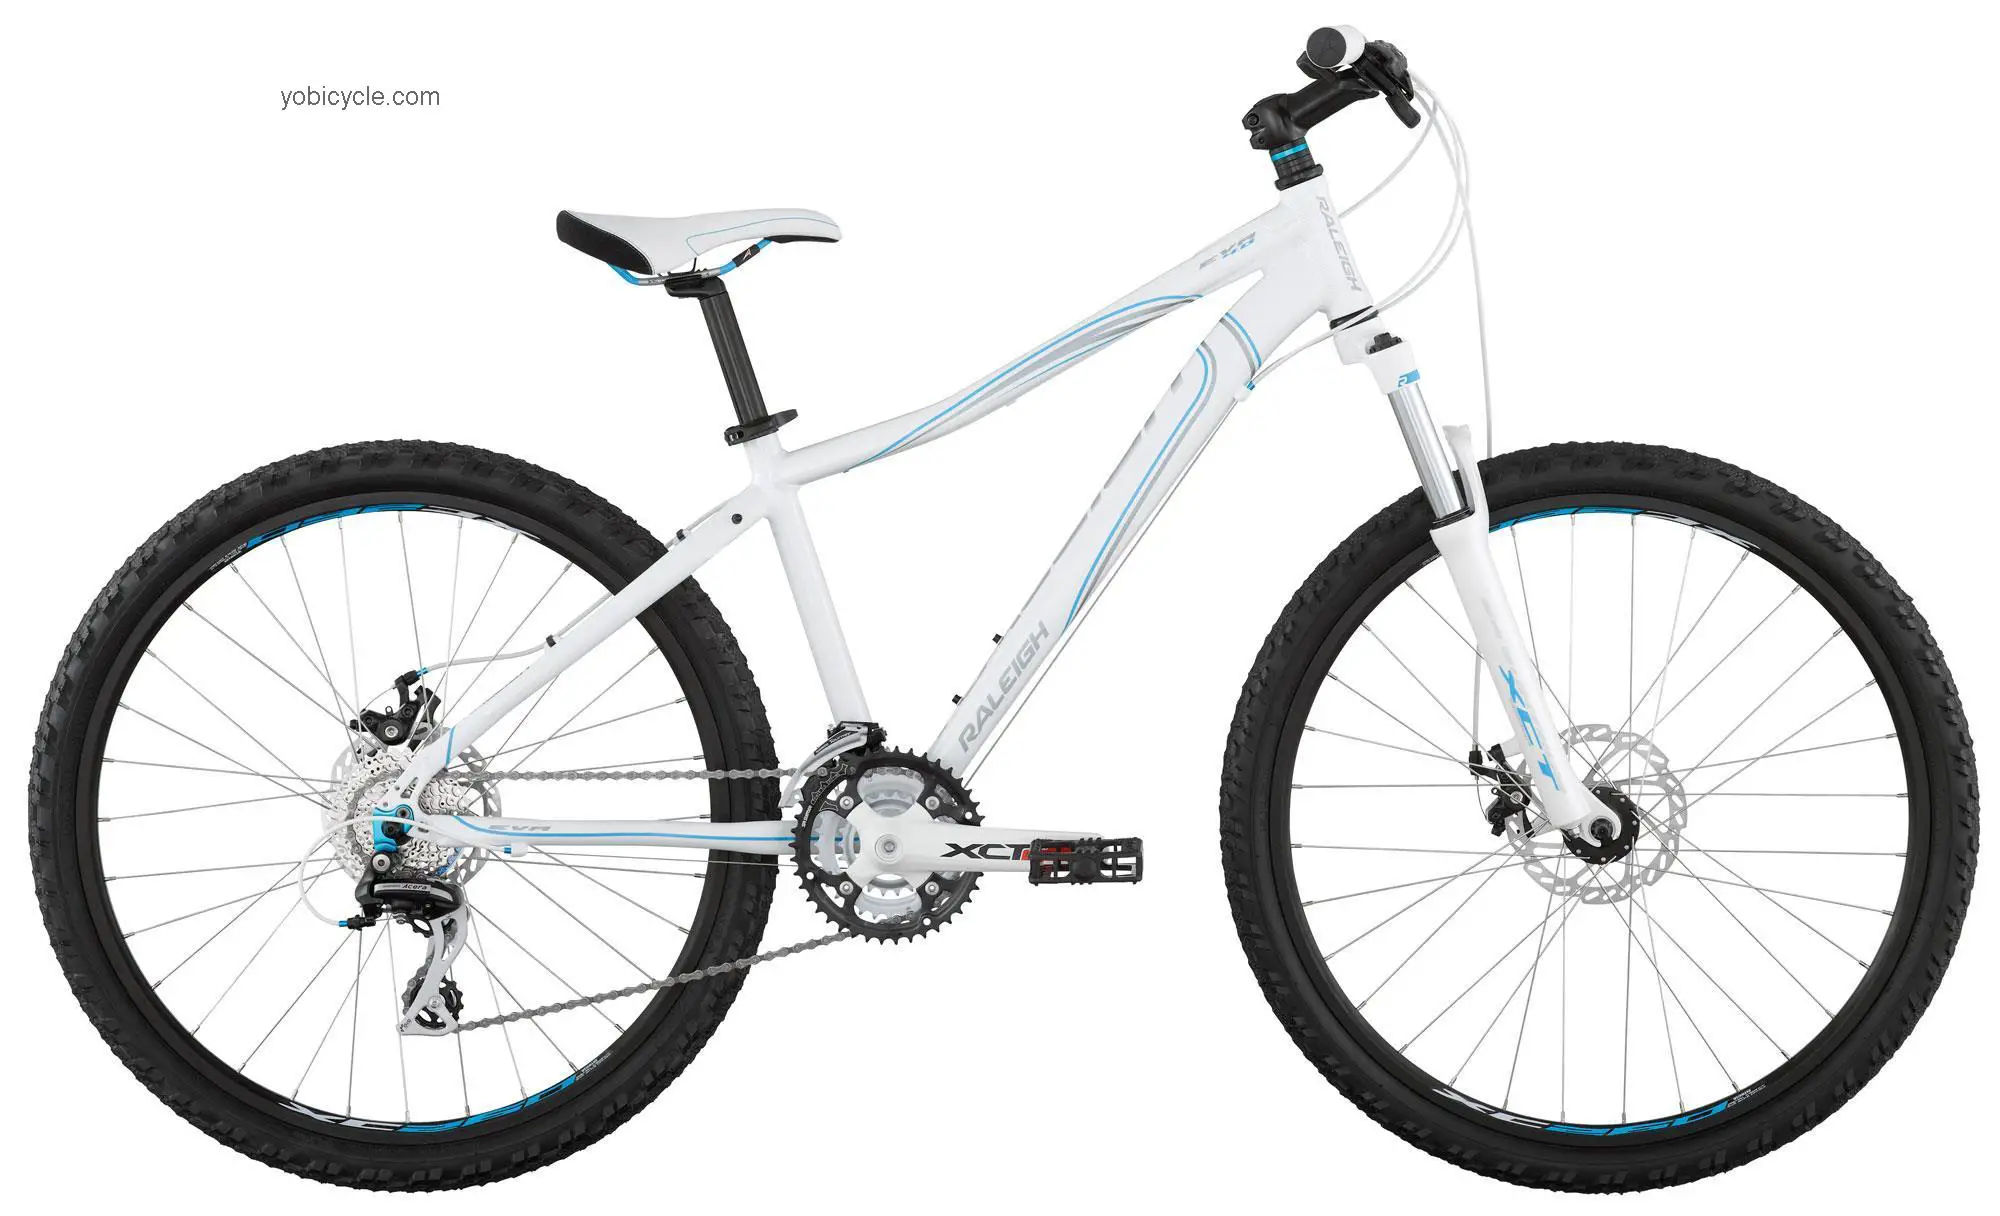 Raleigh Eva 4.0 2012 comparison online with competitors